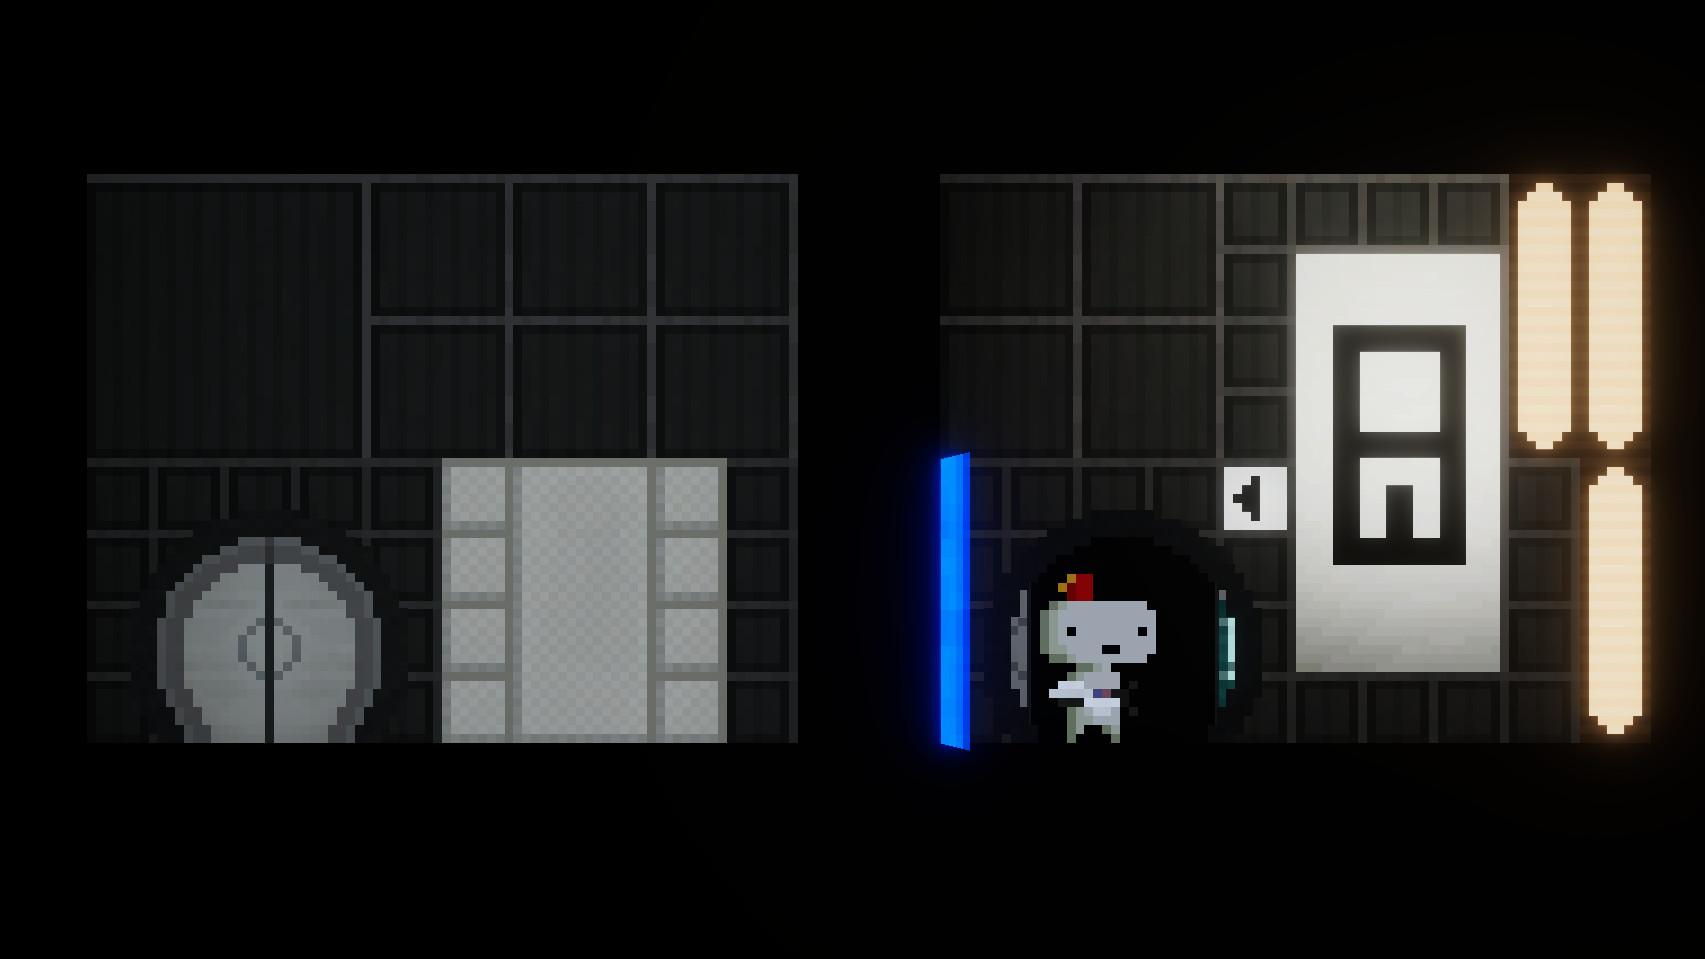  Fez and Portal are perfect partners in this short free mashup 